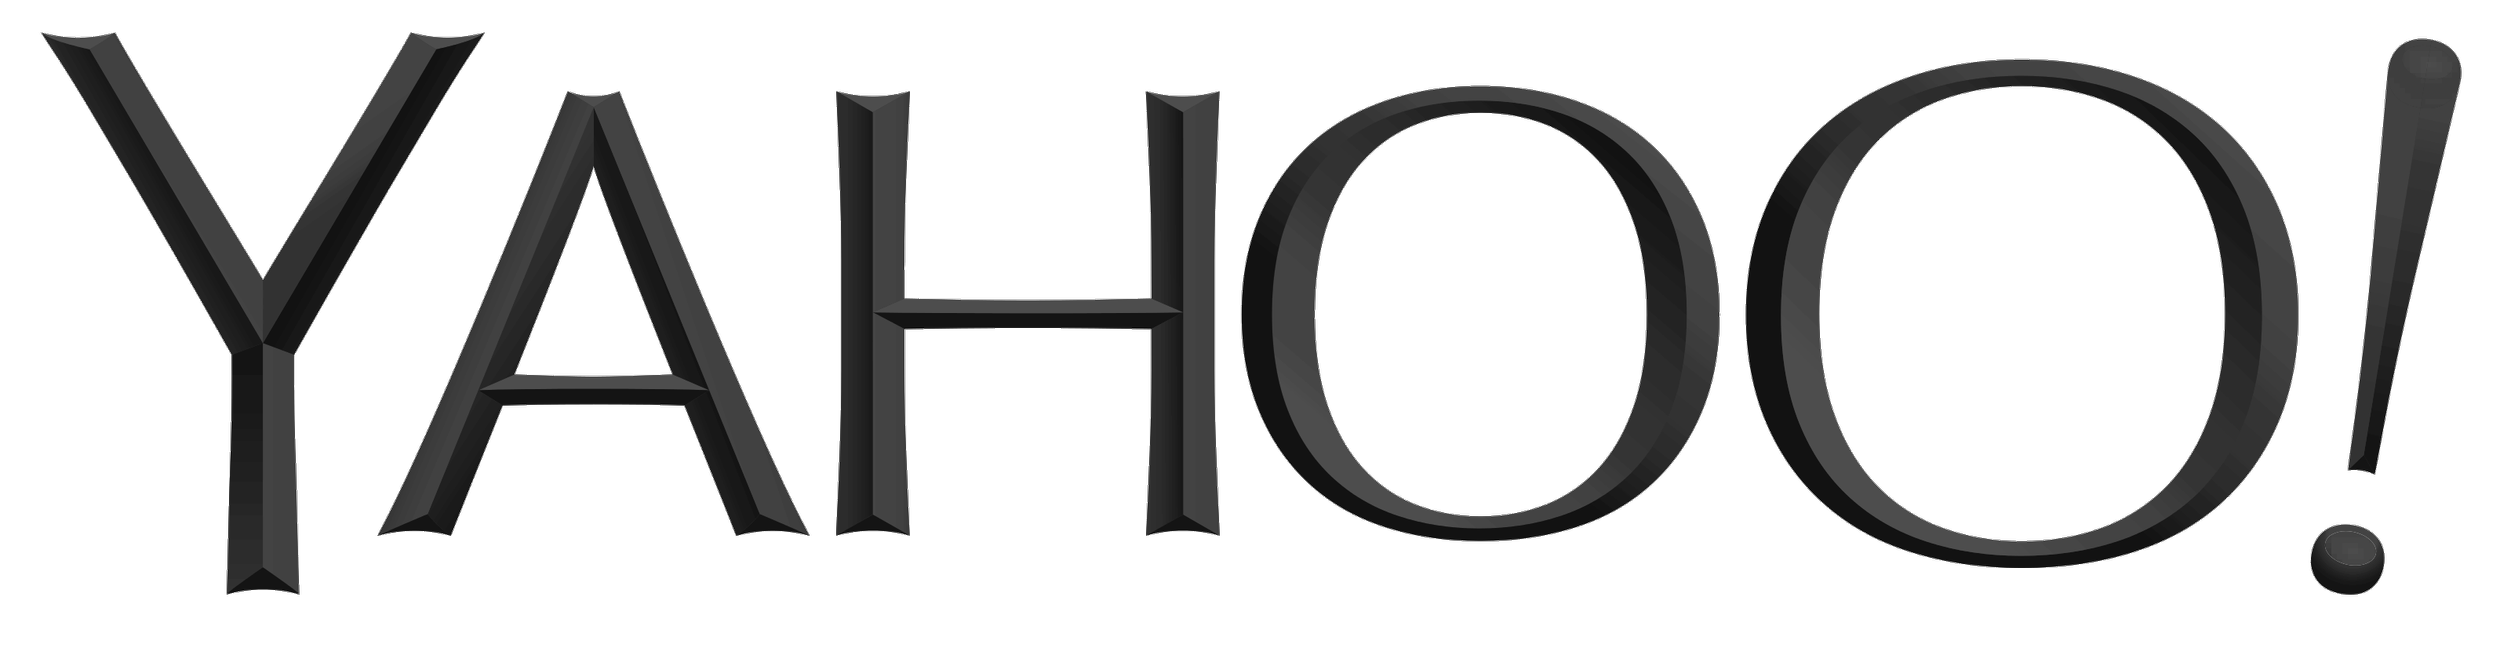 Yahoo-Logo-Black-and-White.png